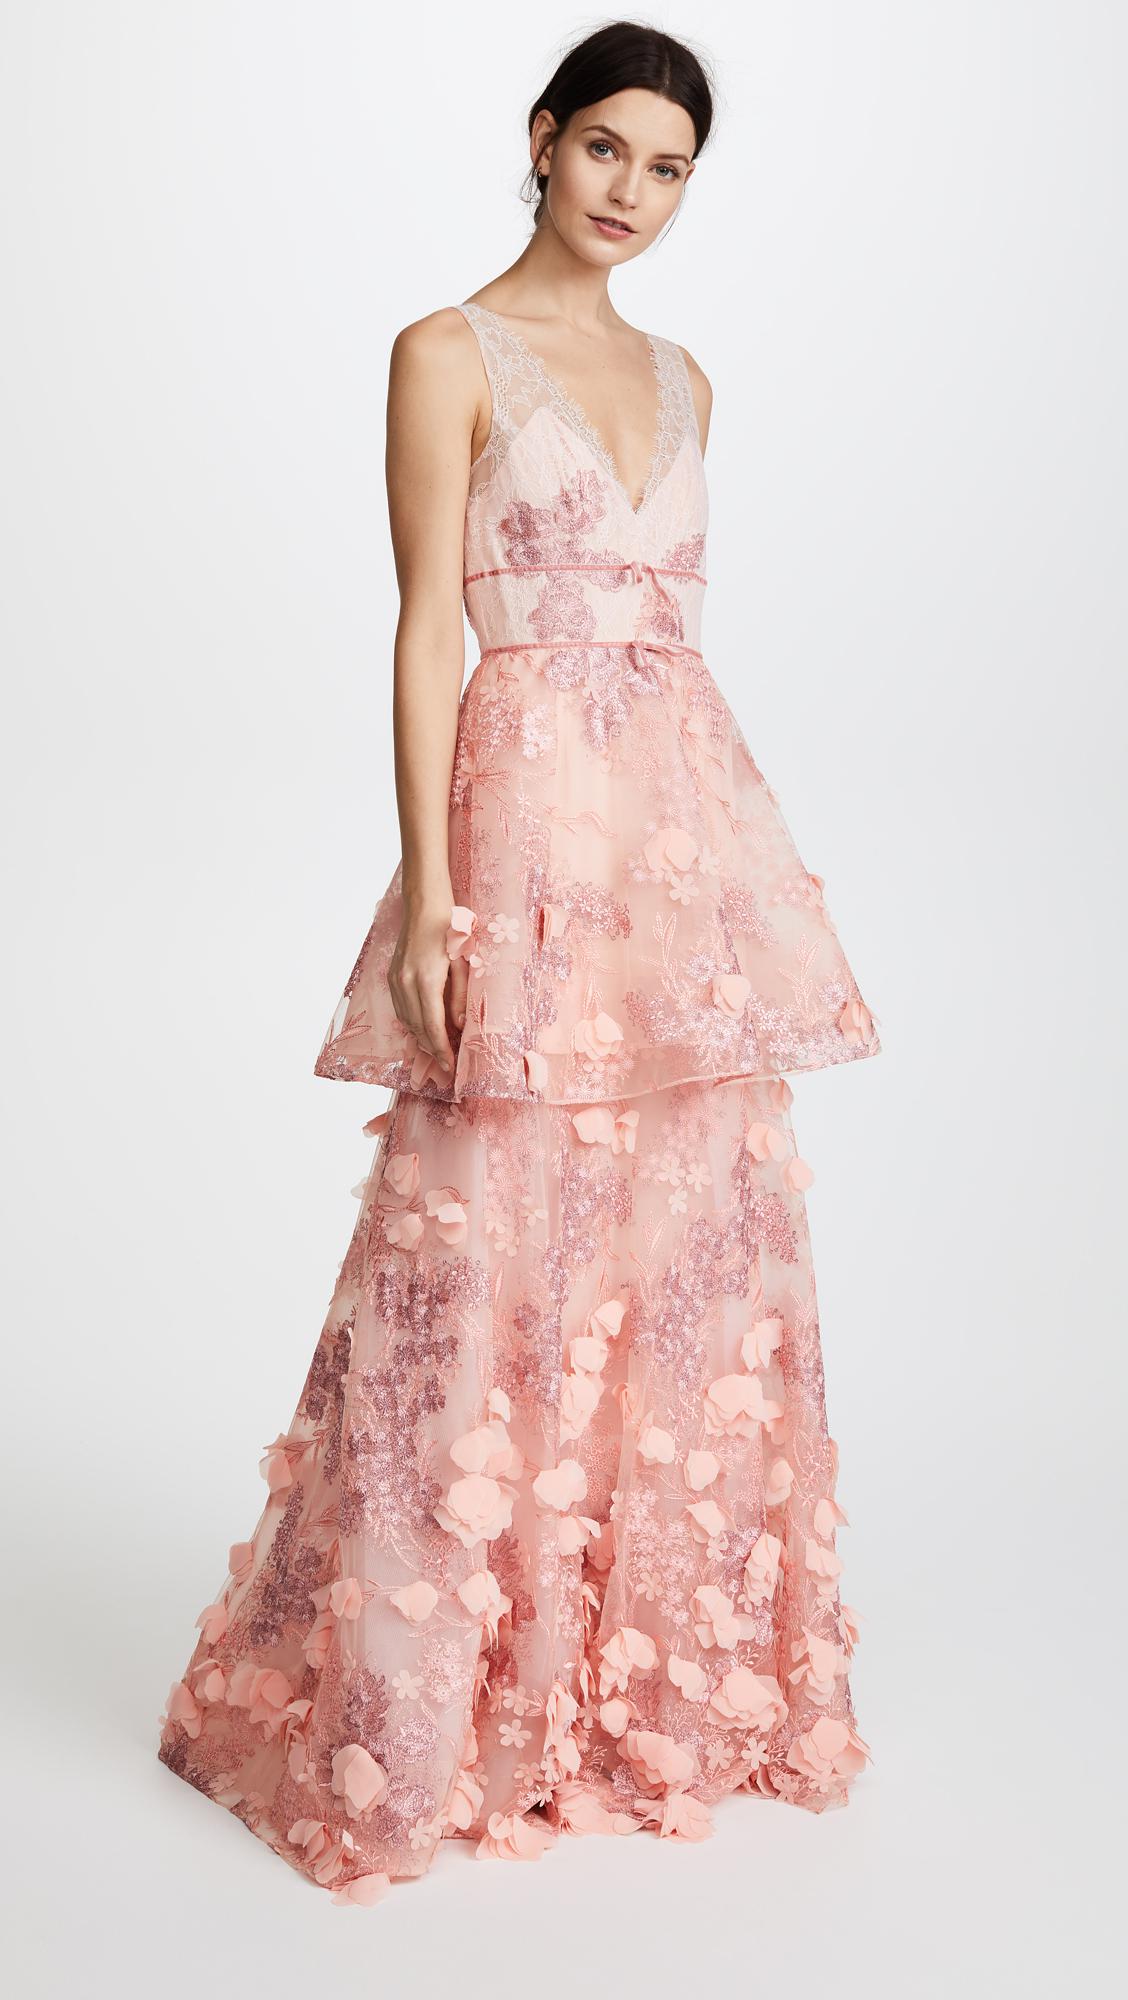 Lyst - Notte By Marchesa Sleeveless Two Tiered Gown in Pink